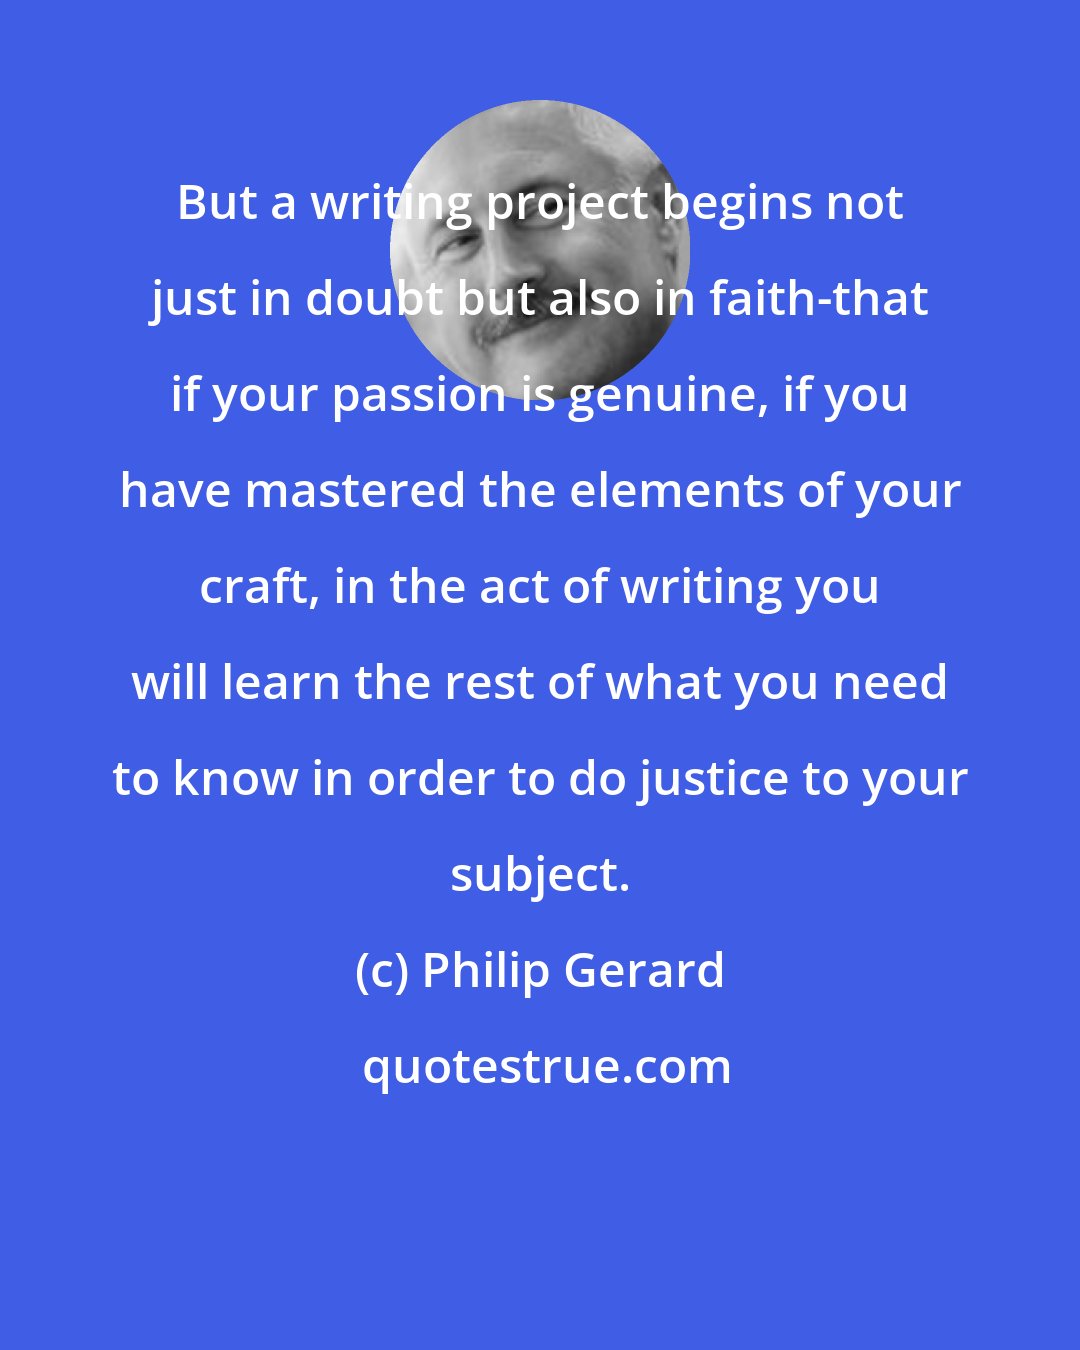 Philip Gerard: But a writing project begins not just in doubt but also in faith-that if your passion is genuine, if you have mastered the elements of your craft, in the act of writing you will learn the rest of what you need to know in order to do justice to your subject.